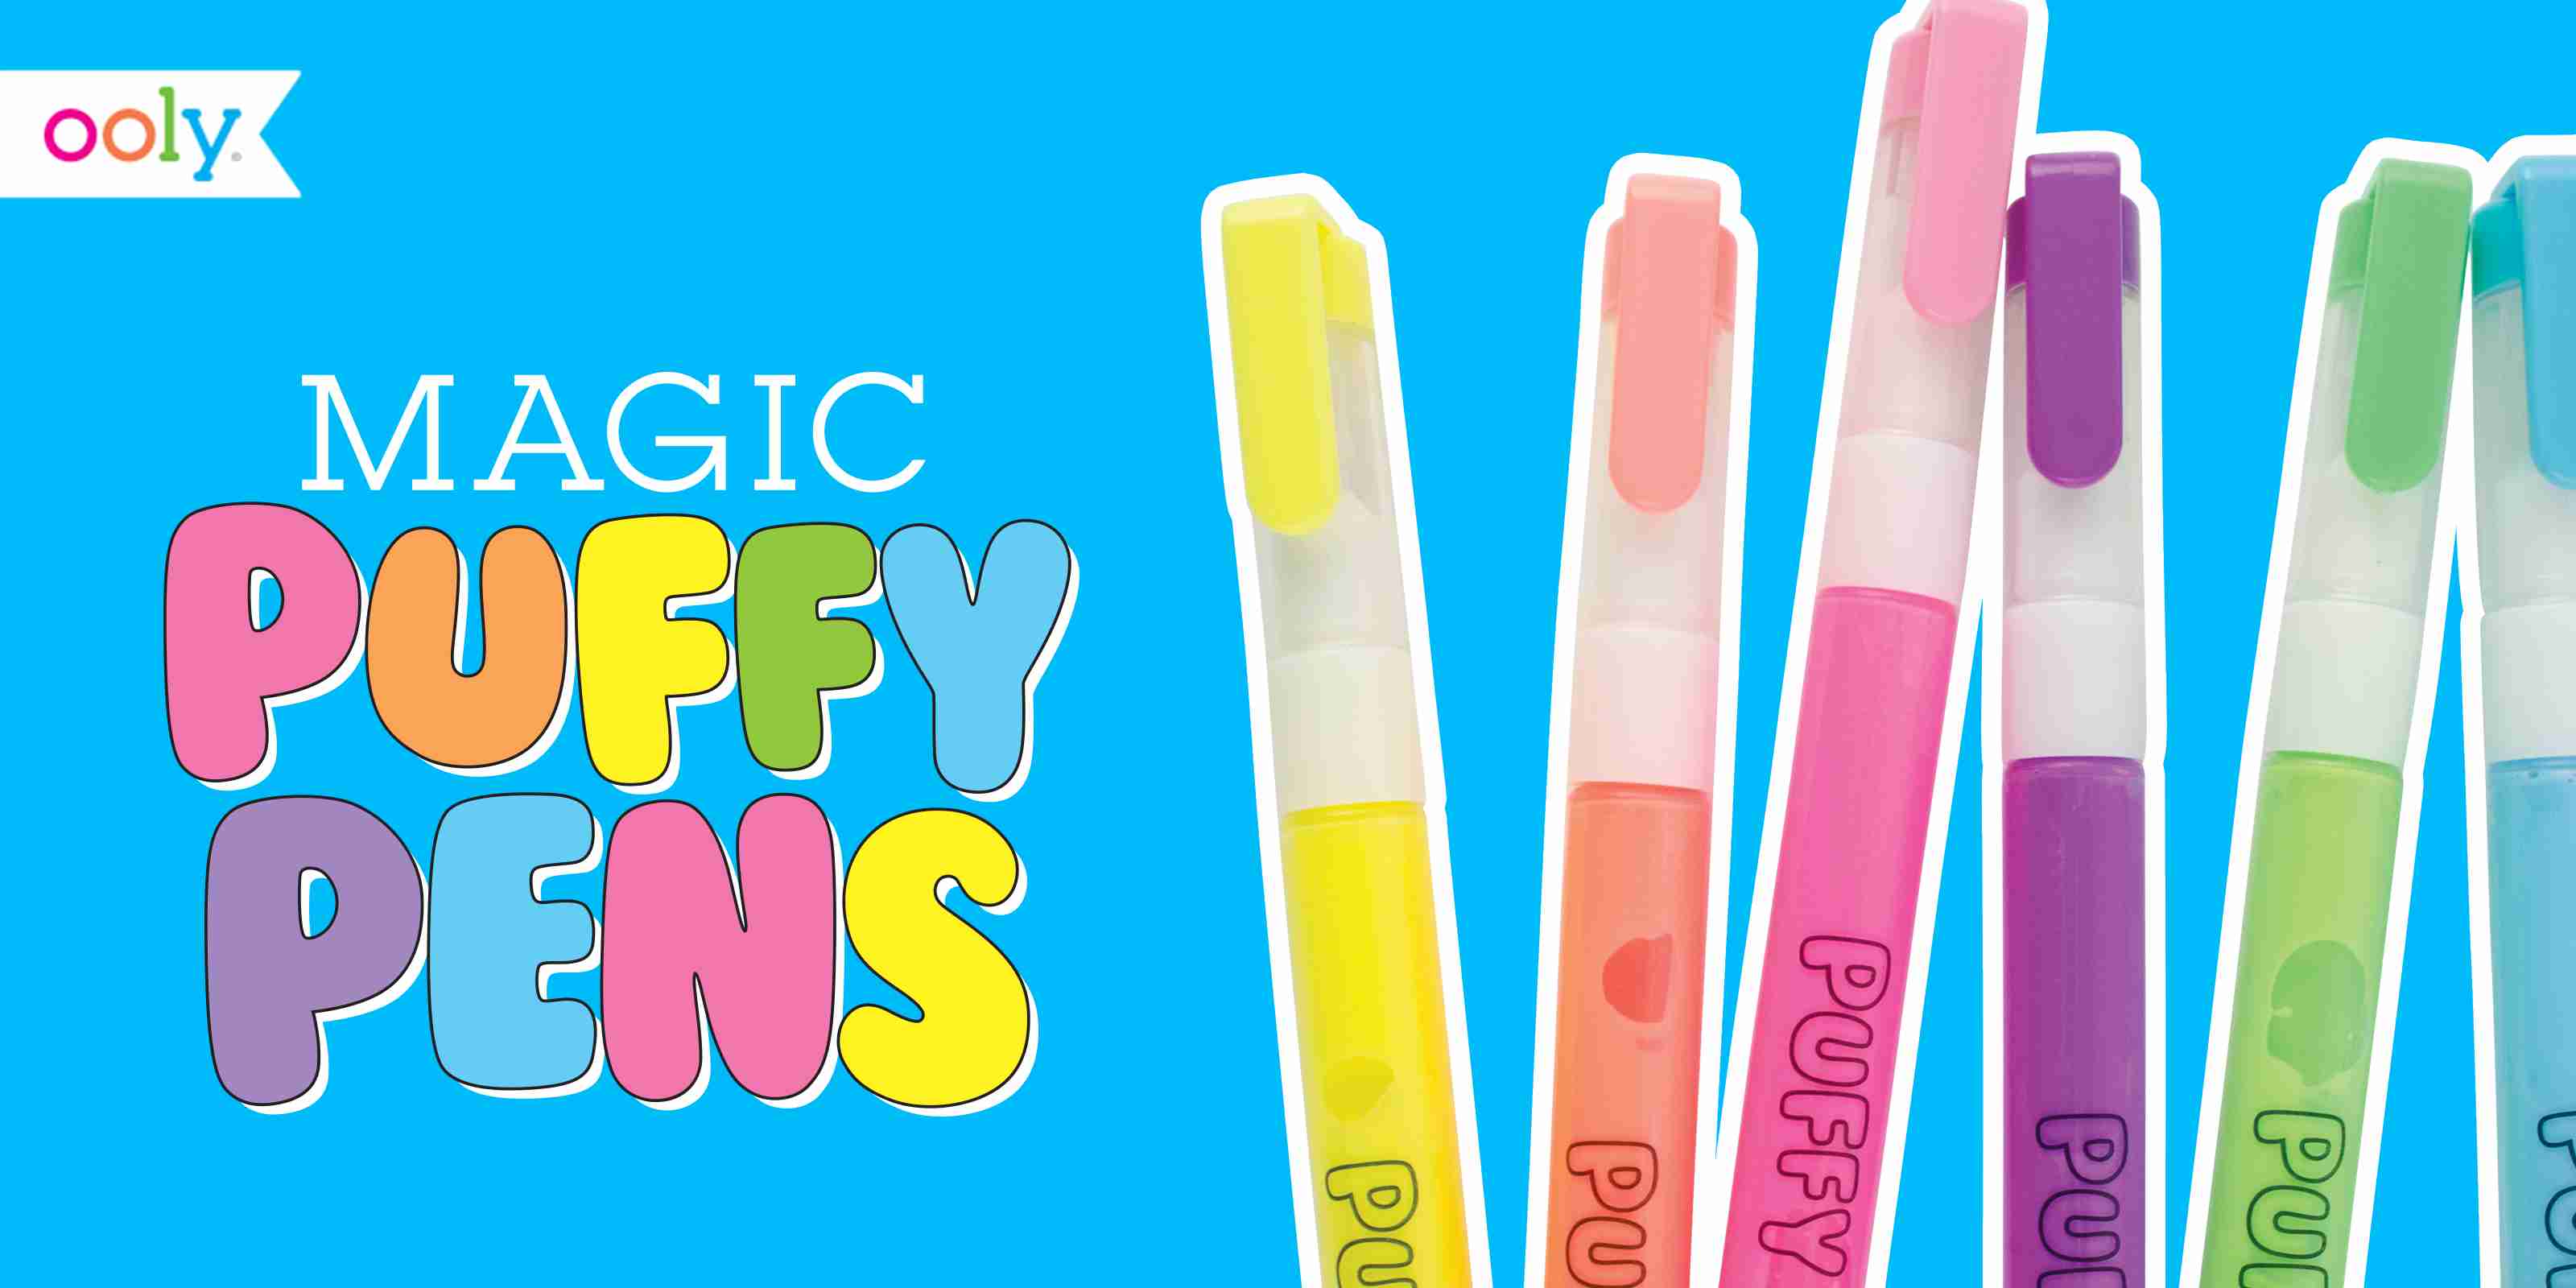  ADDY & PLUSY Dong-A Magic Puffy Popcorn Color Pen 10